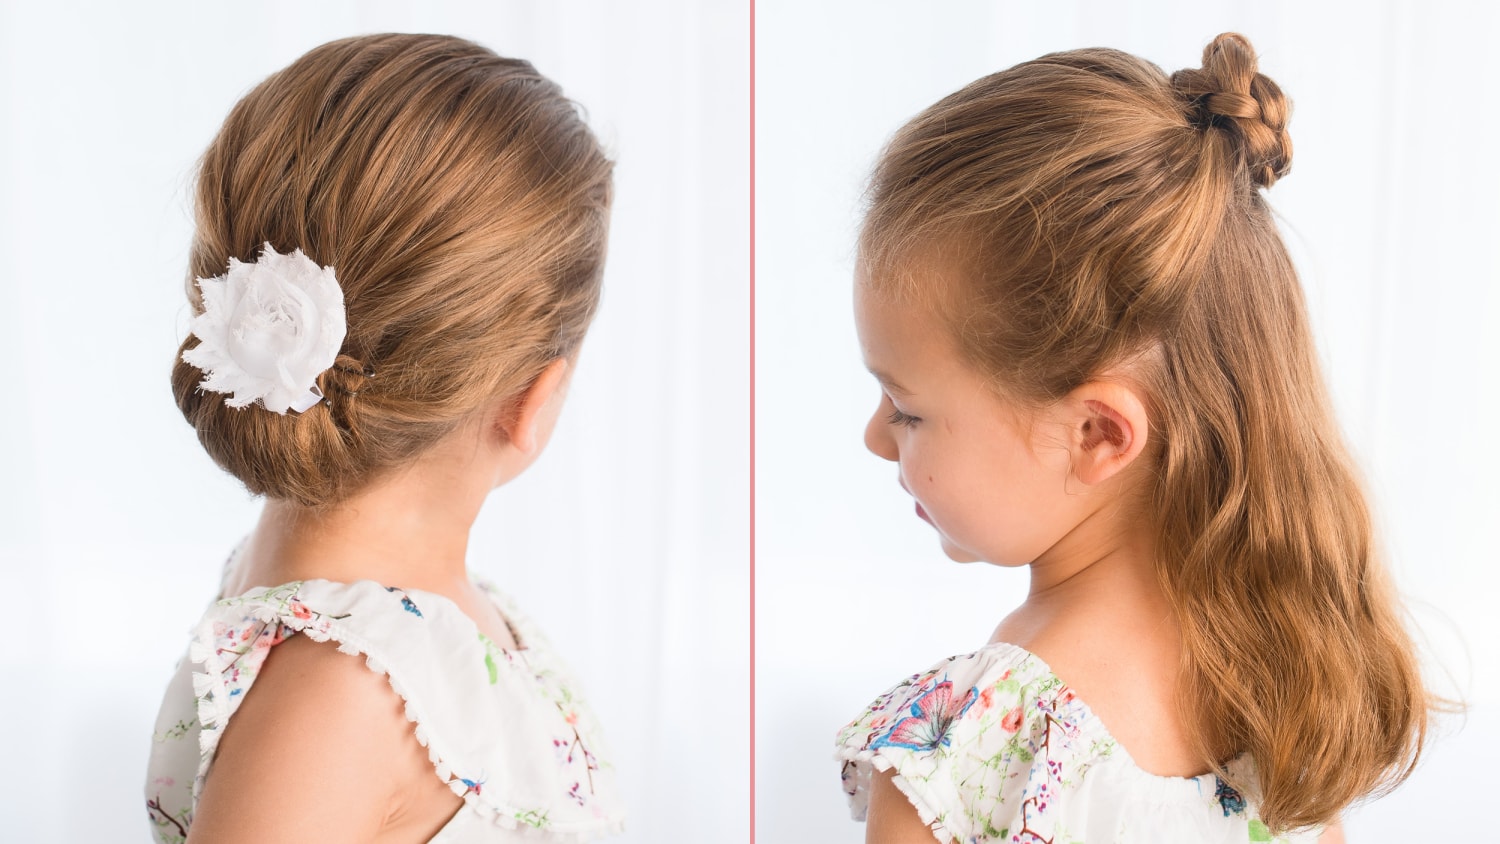 Braids for kids: cute hairstyles for children for every occasion - Legit.ng